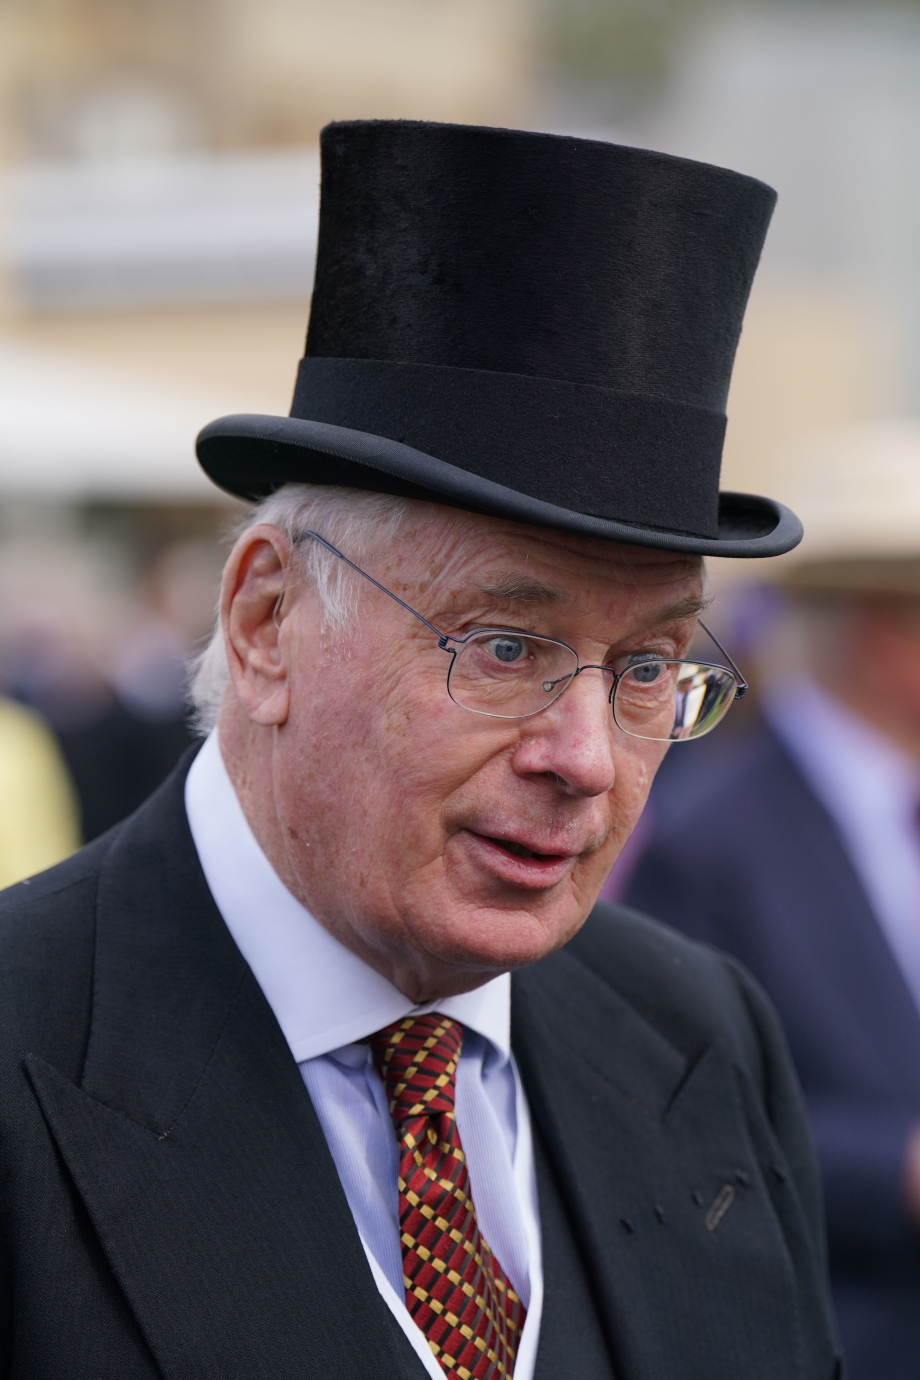 The Duke of Gloucester at the Buckingham Palace Garden Party